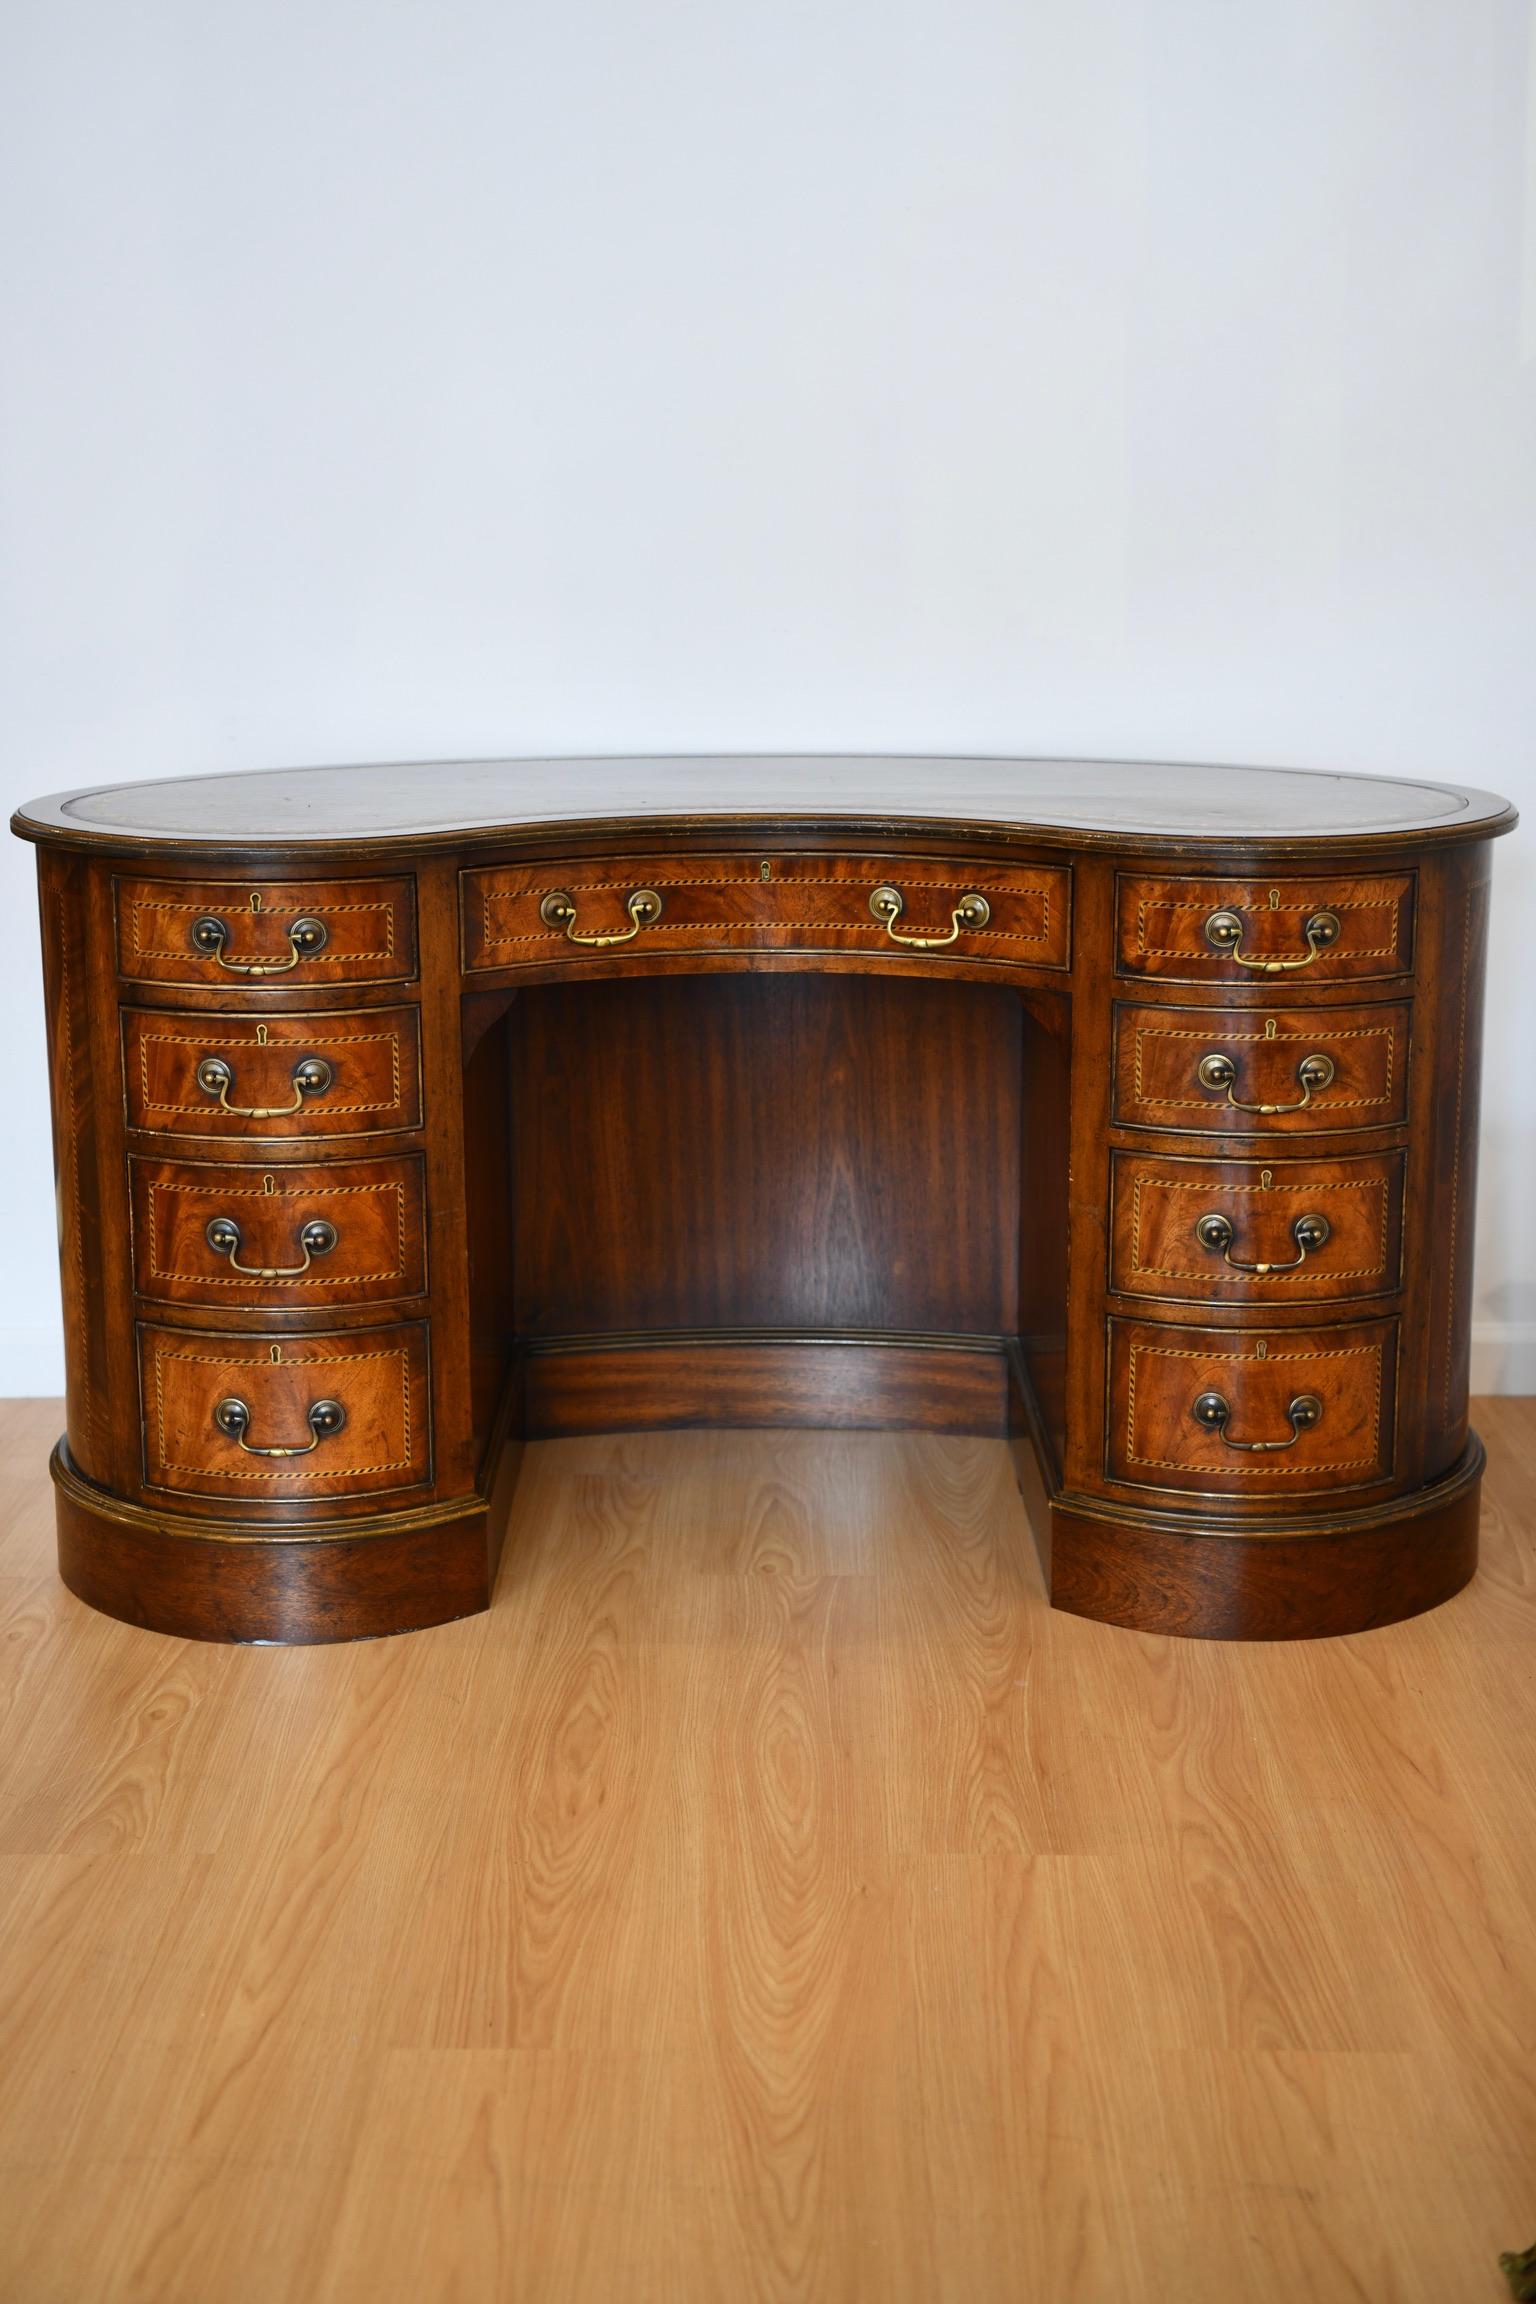 Kidney shaped kneehole desk with leather top by Yorkshire House Inc, High Point North Carolina. Dimensions: 30